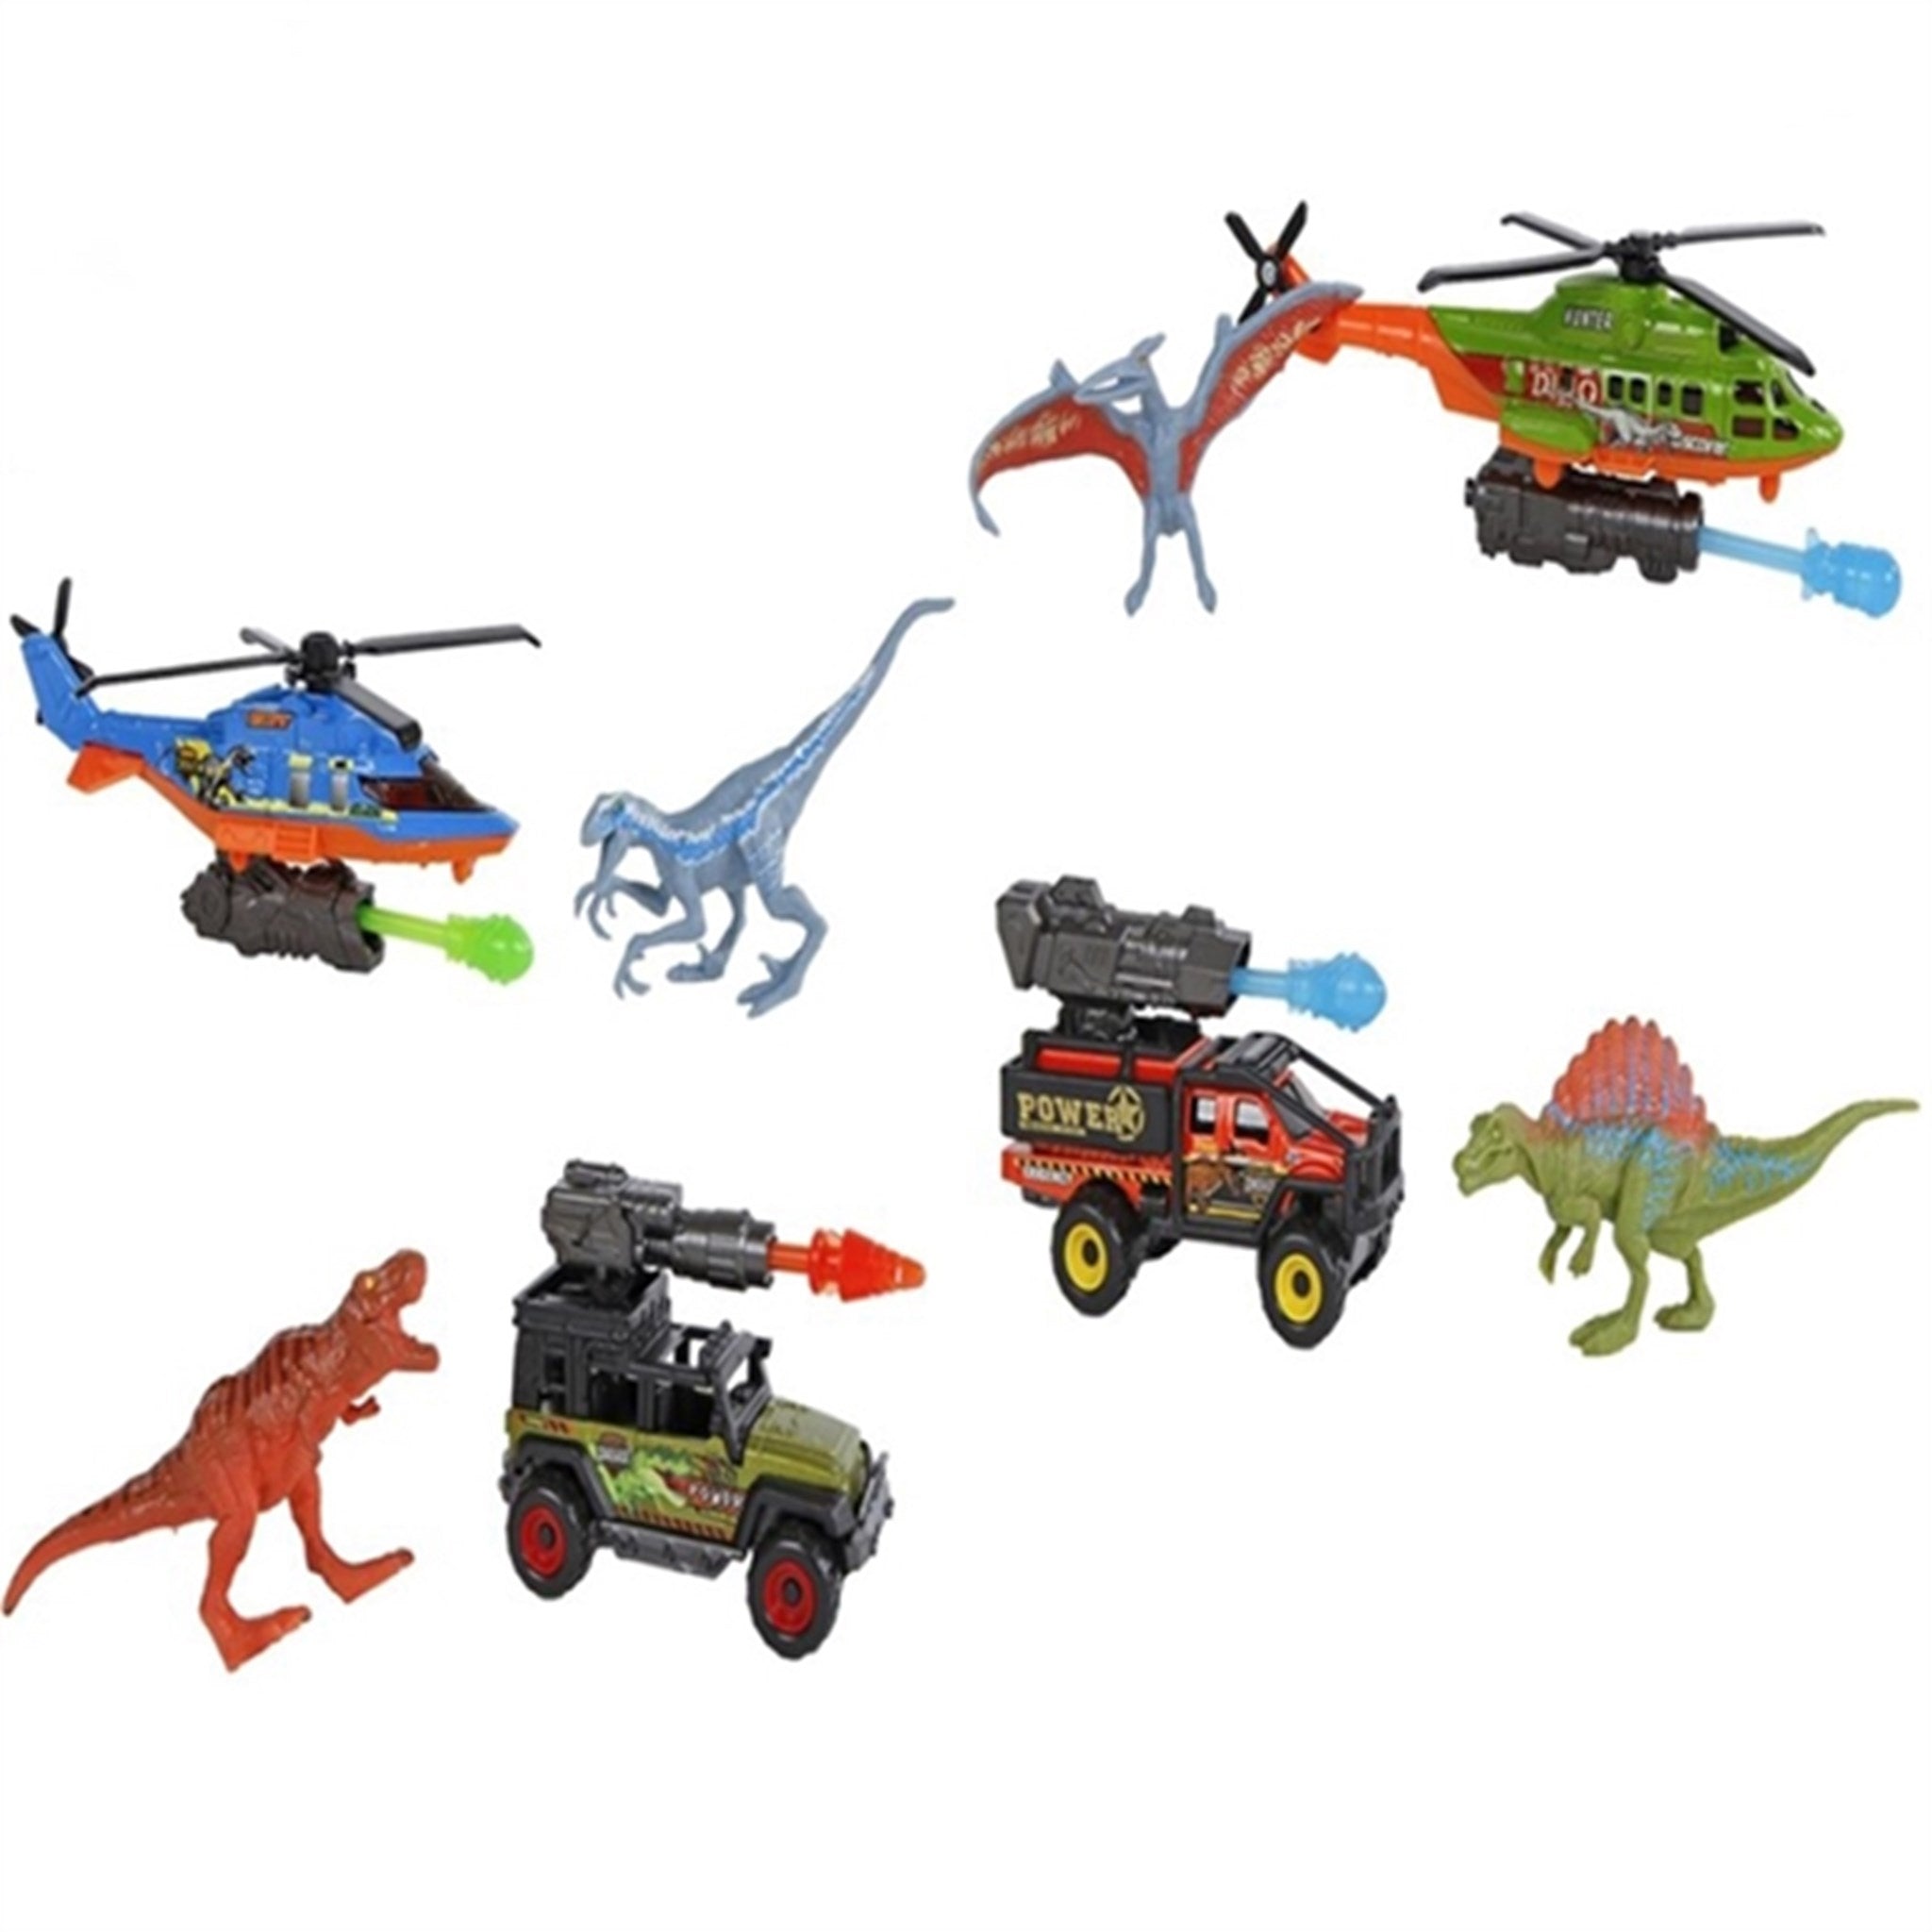 Pocket Money DinoWorld Vehicle with Shooting Function and Dinosaur